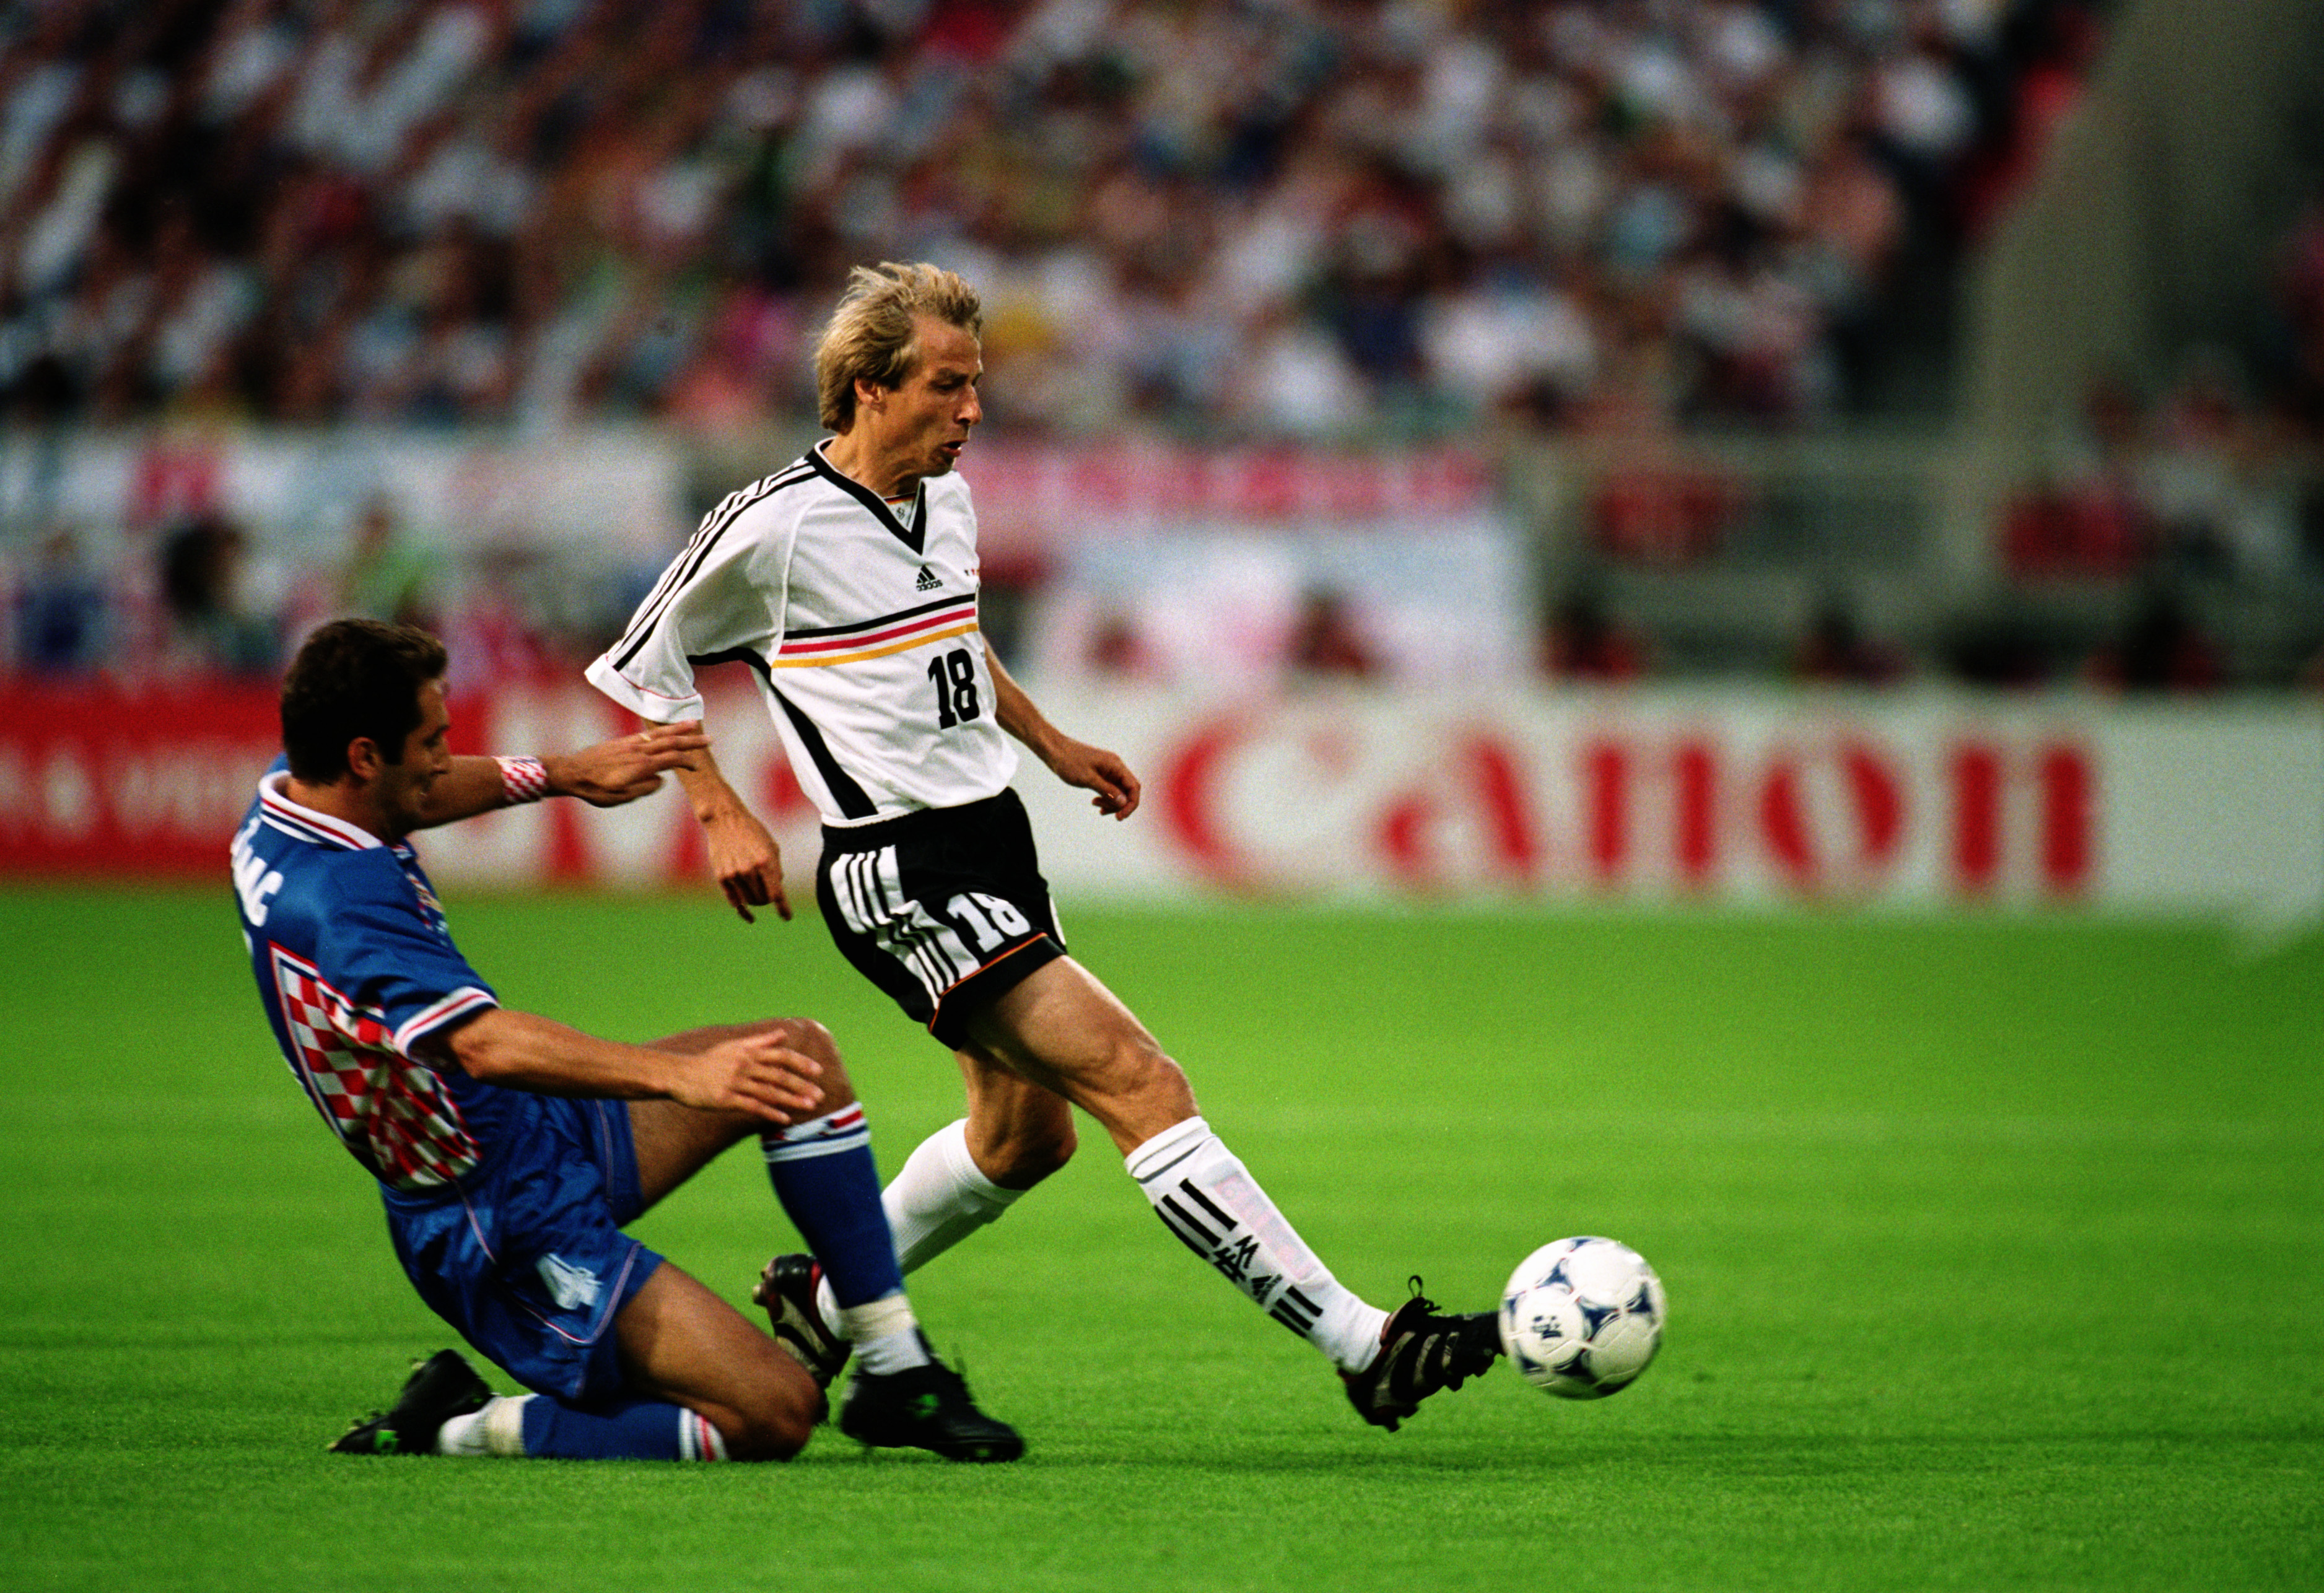 LYON - JULY 4:  Jurgen Klinsmann of Germany passes the ball as Igor Stimac of Croatia makes a challenge during the FIFA World Cup Finals 1998 Quarter Final match between Germany and Croatia held on July 4, 1998 at Stade Gerland, in Lyon, France. Croatia w